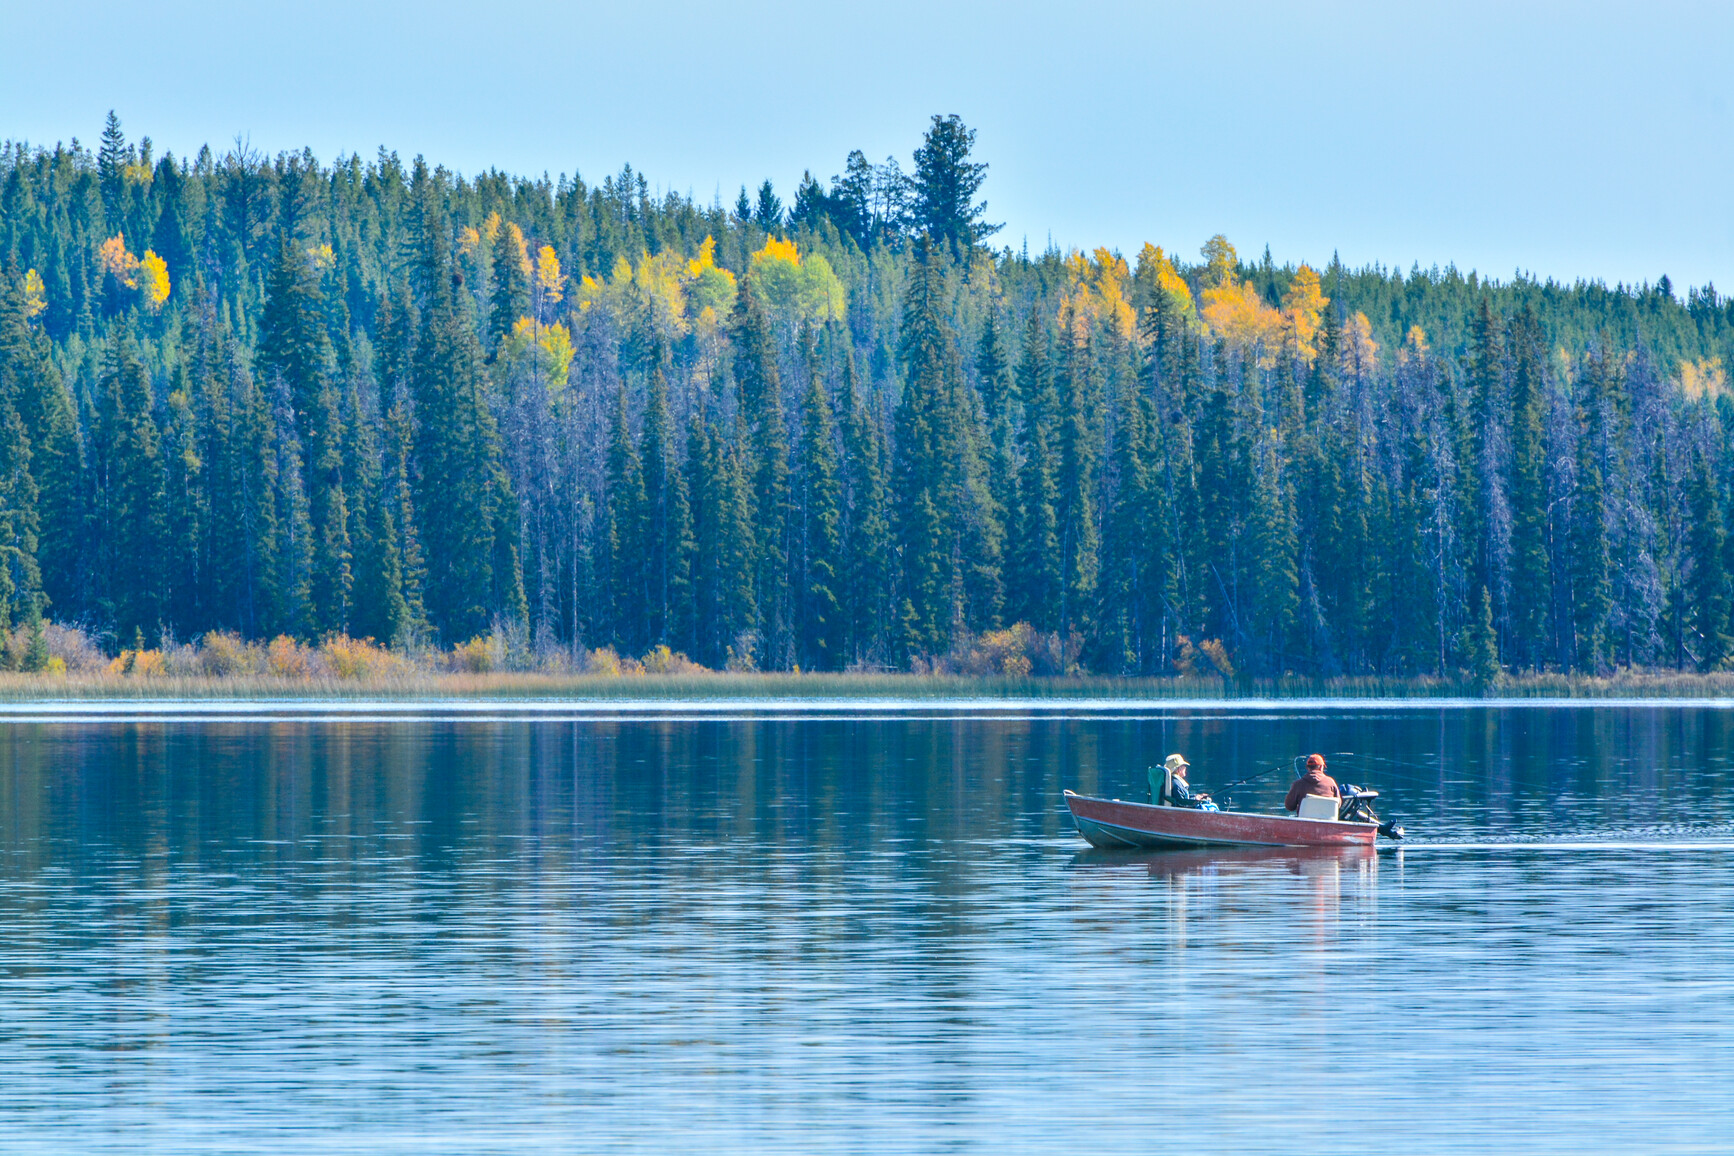 People in boat fishing one the lake. Forest with golden tree tops in background.